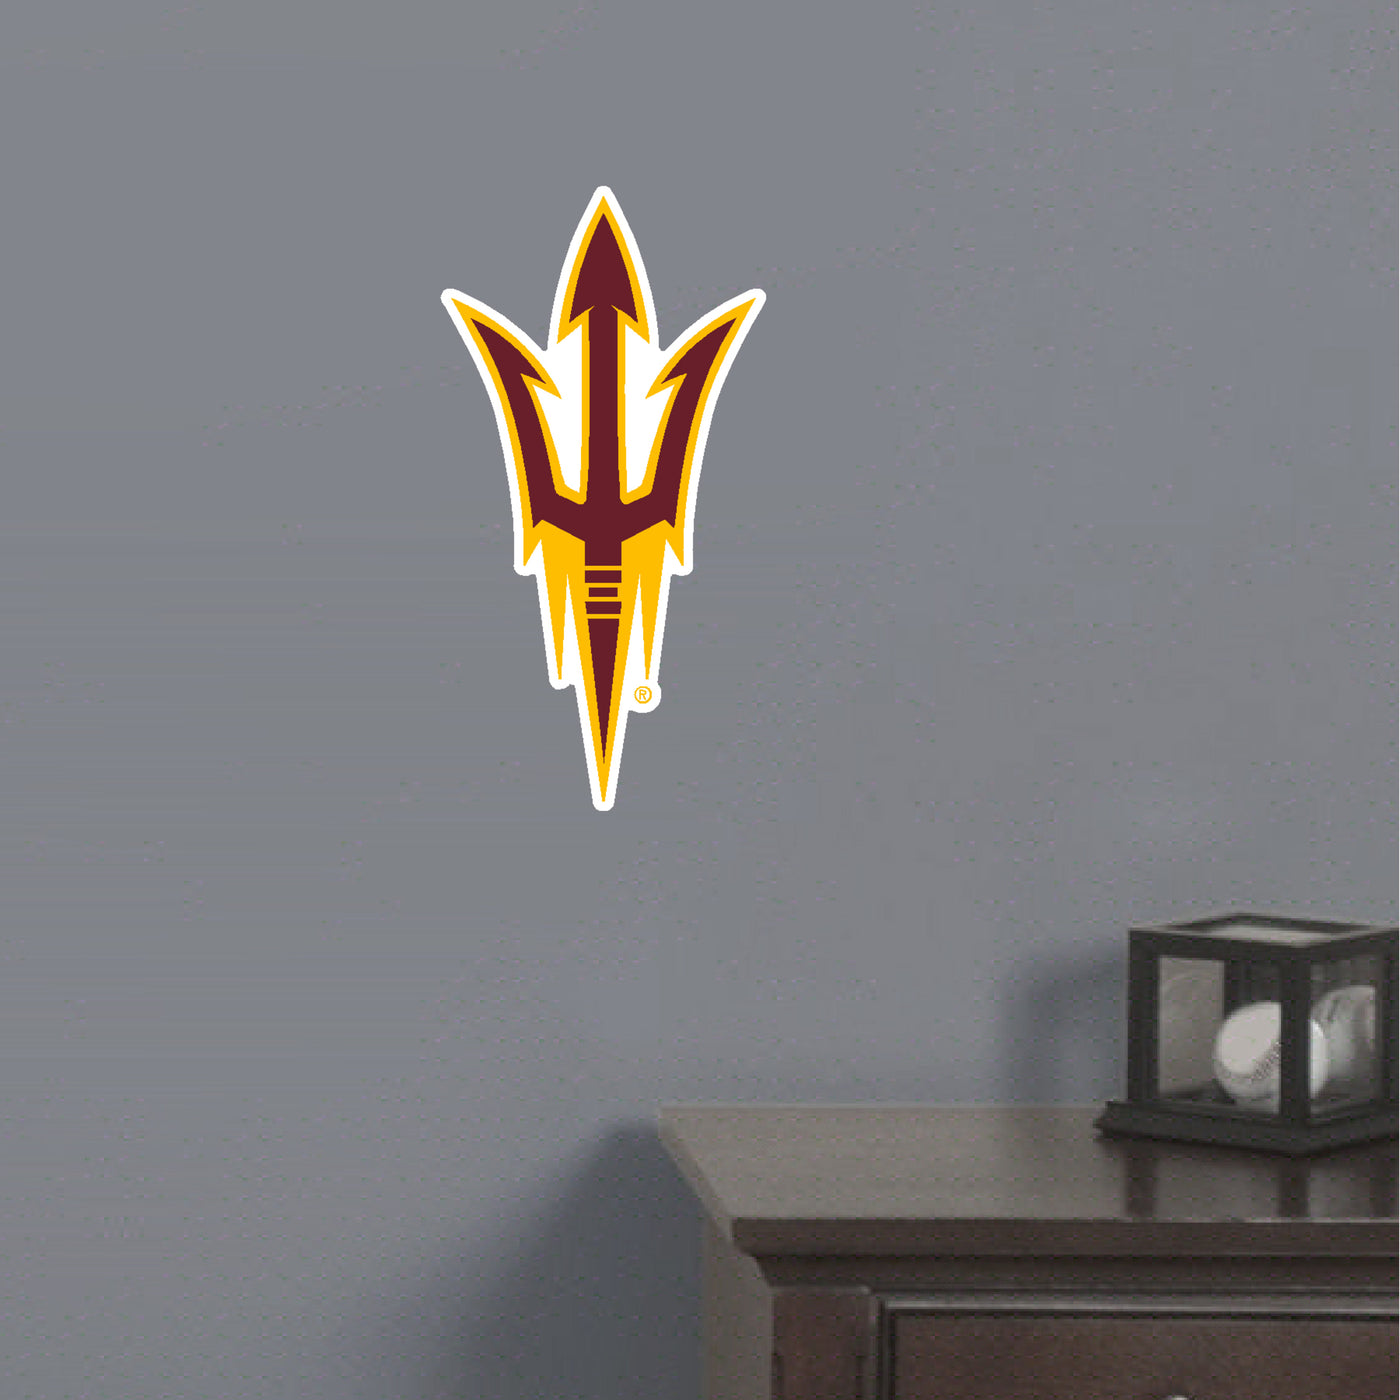 ASU pitchfork mini wall sign above a night stand with a baseball on it